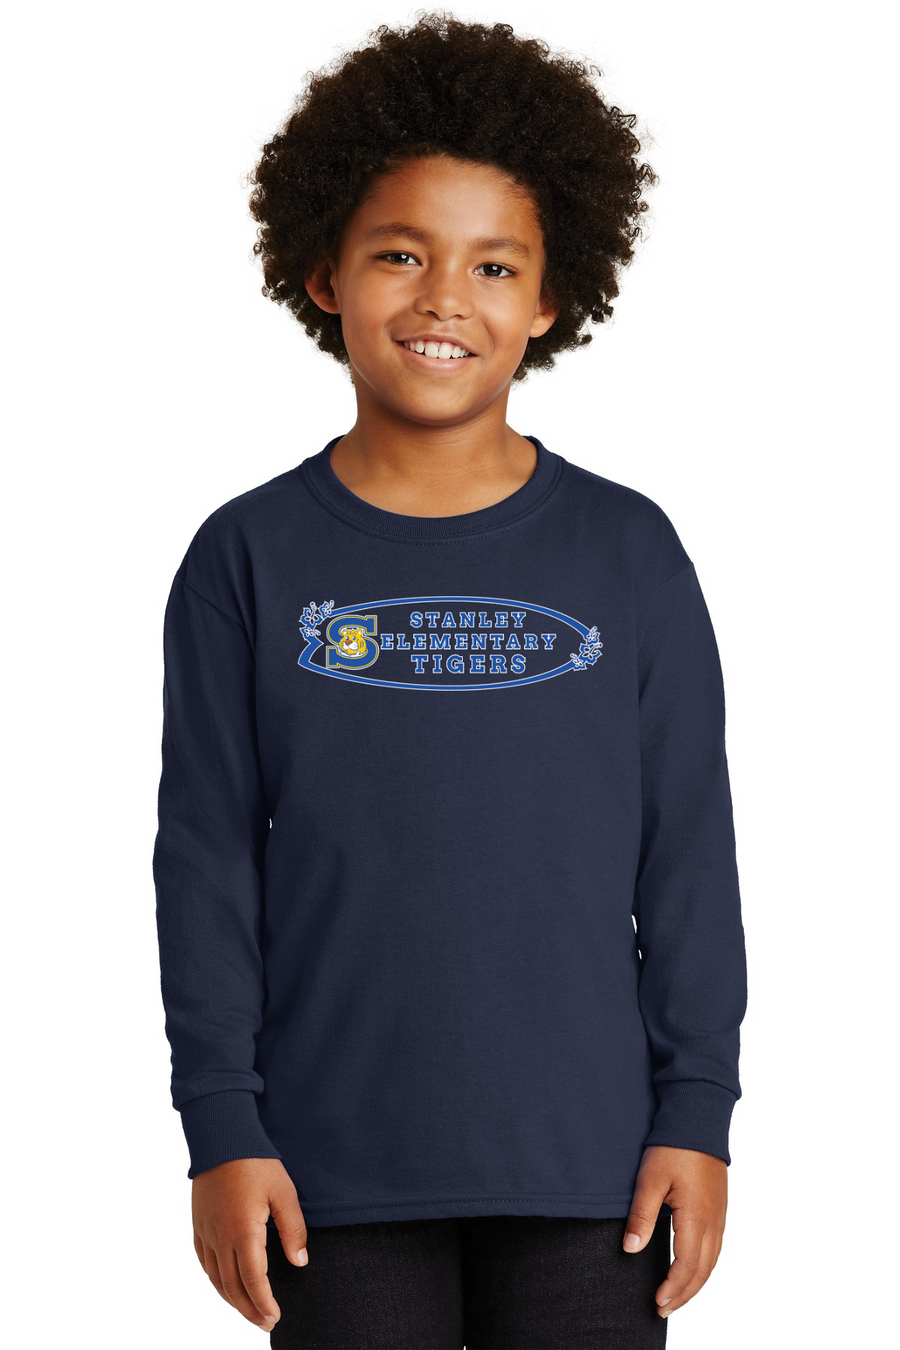 The Tiger Store - Stanley Elementary 2023/24 On-Demand-Unisex Long Sleeve Shirt Surf Board Logo